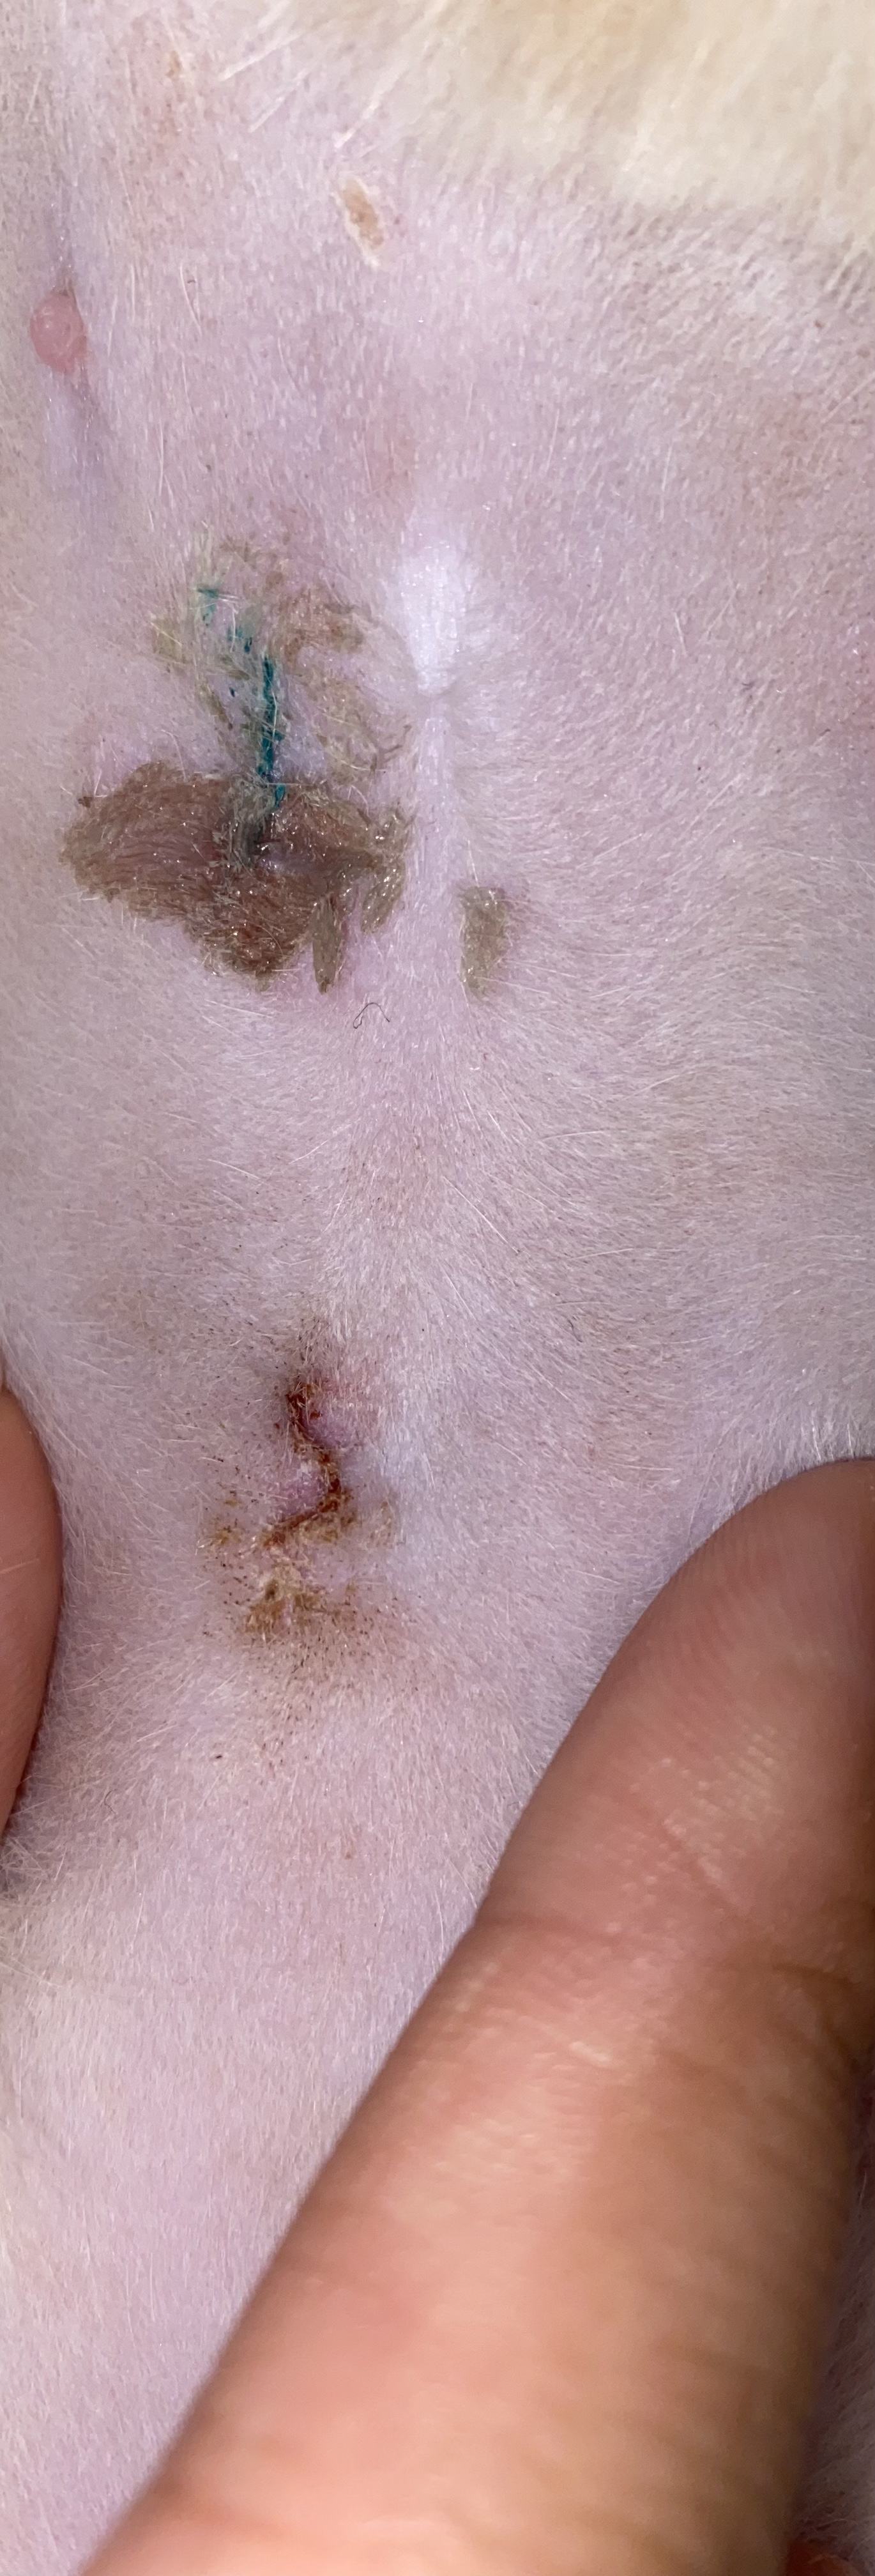 How do I know if my cats spay incision is healing ok